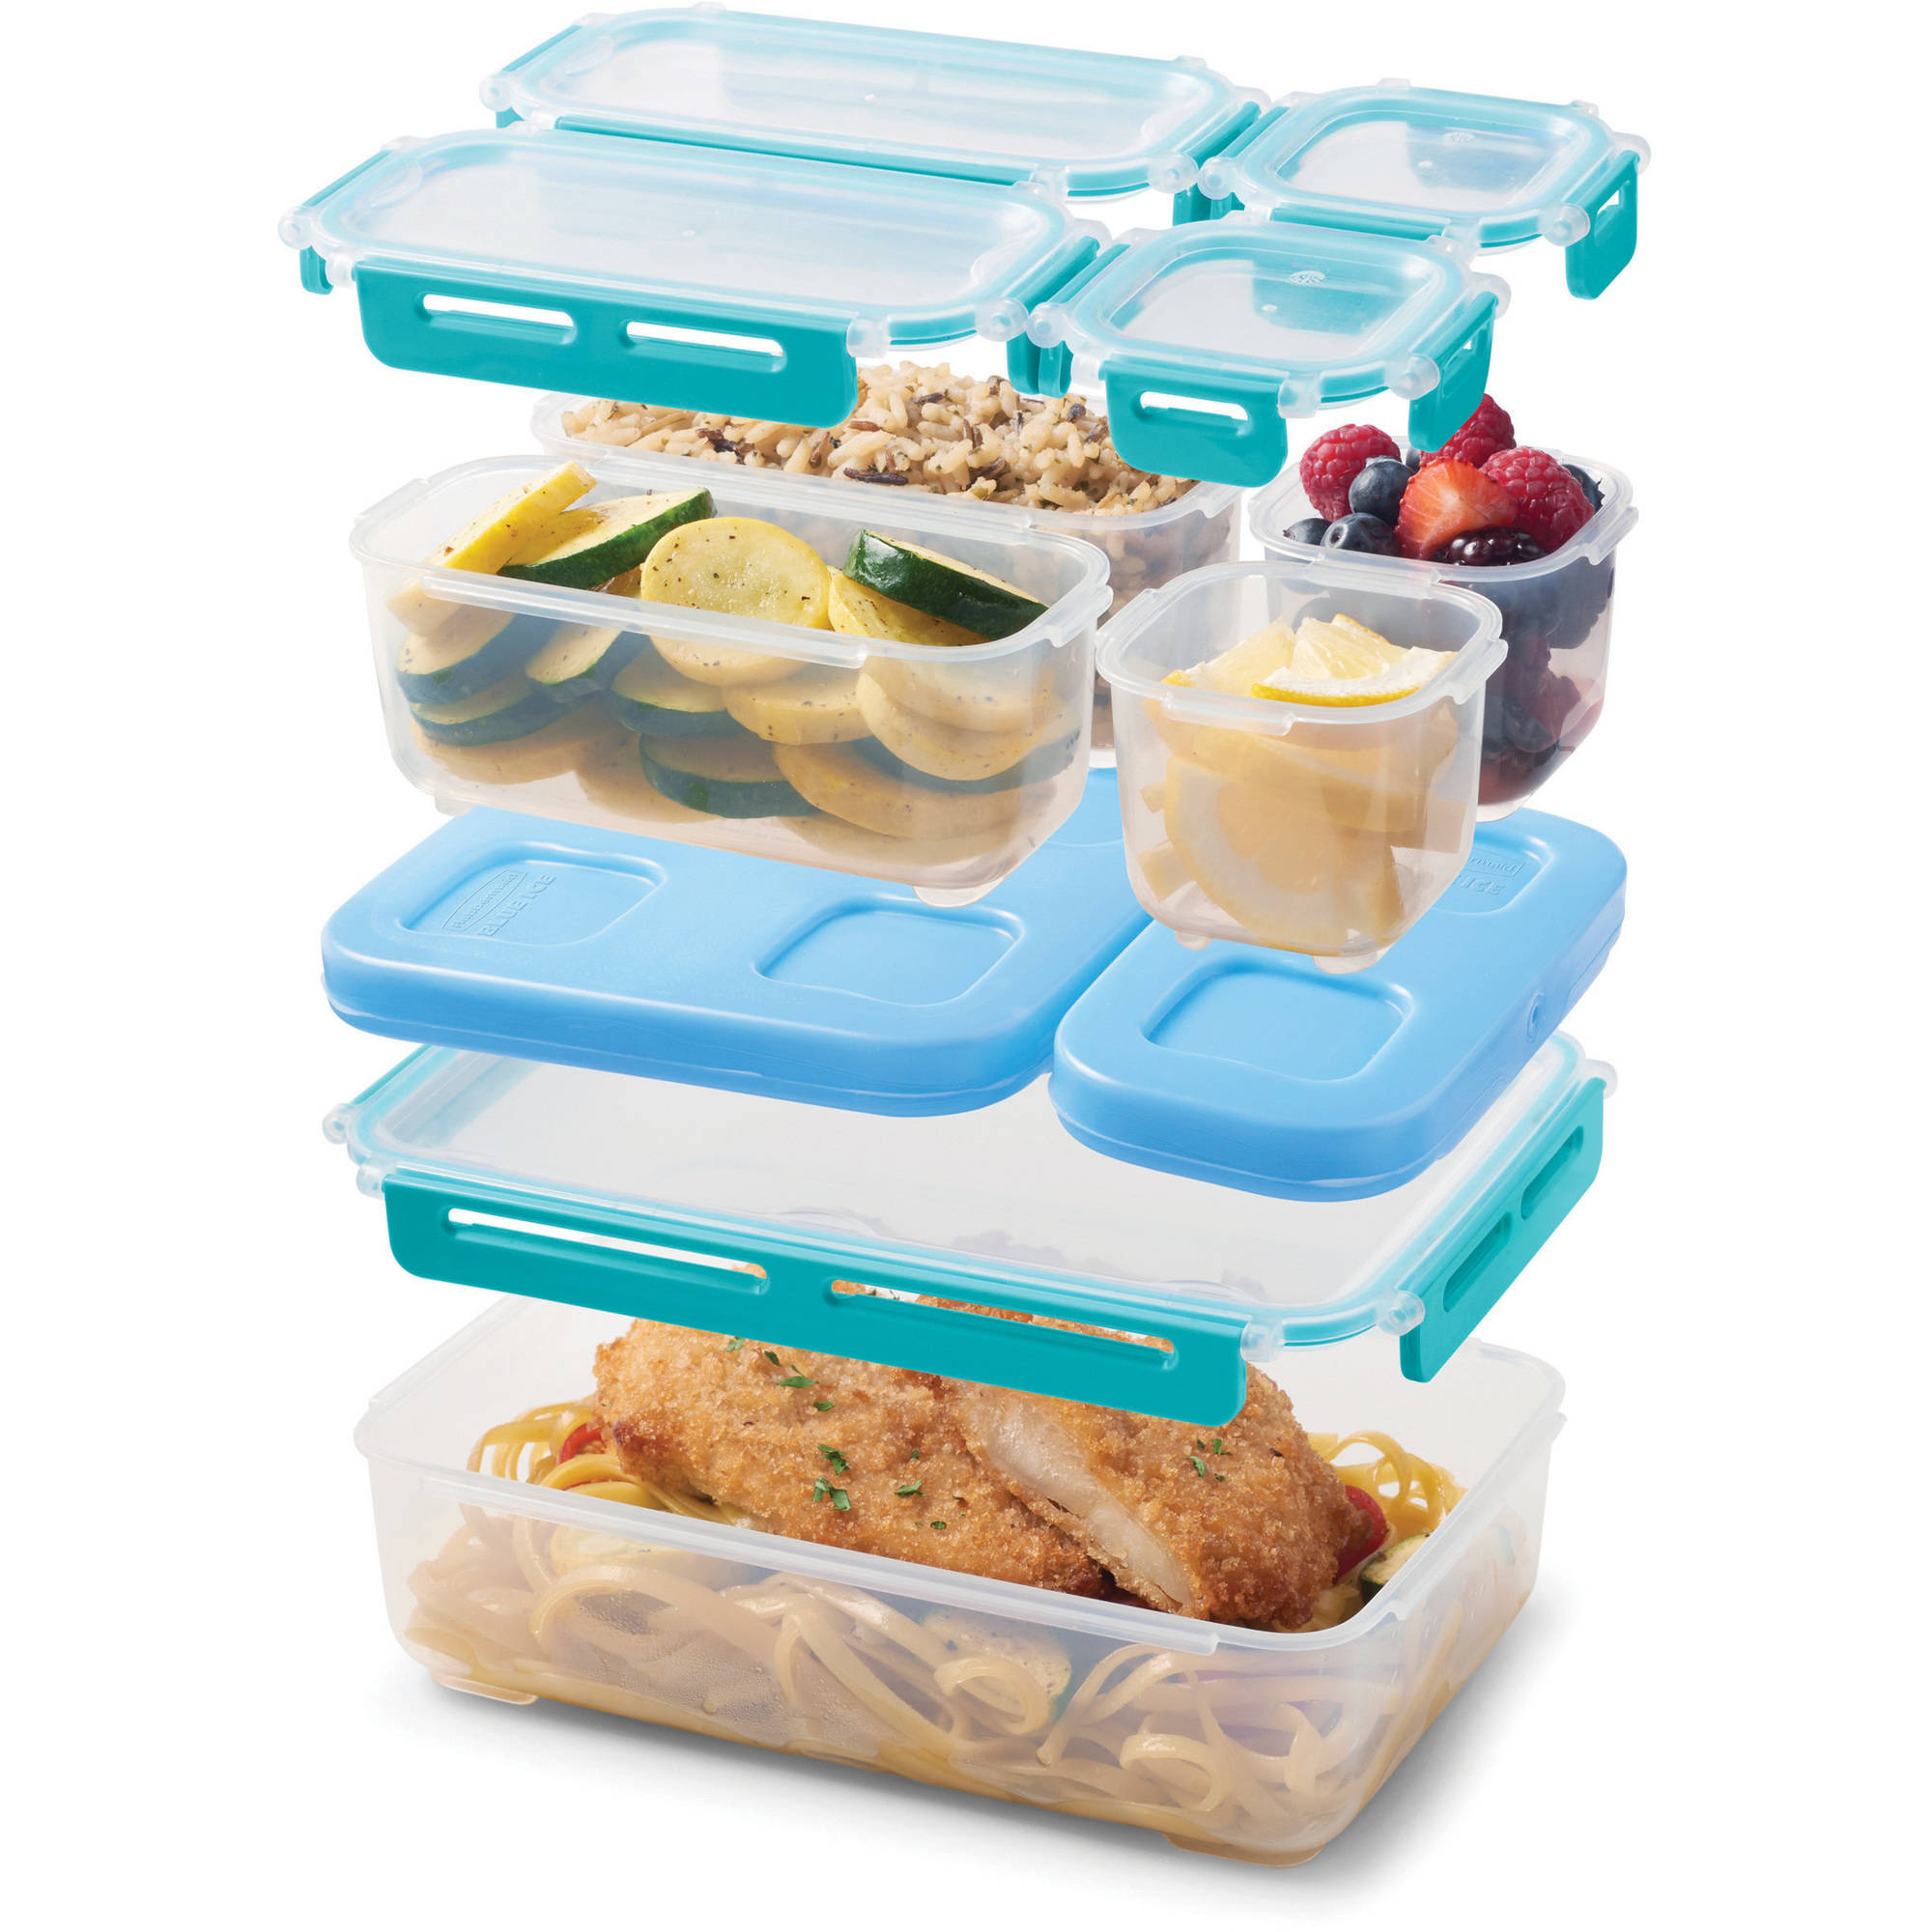 Snag this Rubbermaid 7-Cup Food Storage Container while it's $3 Prime  shipped